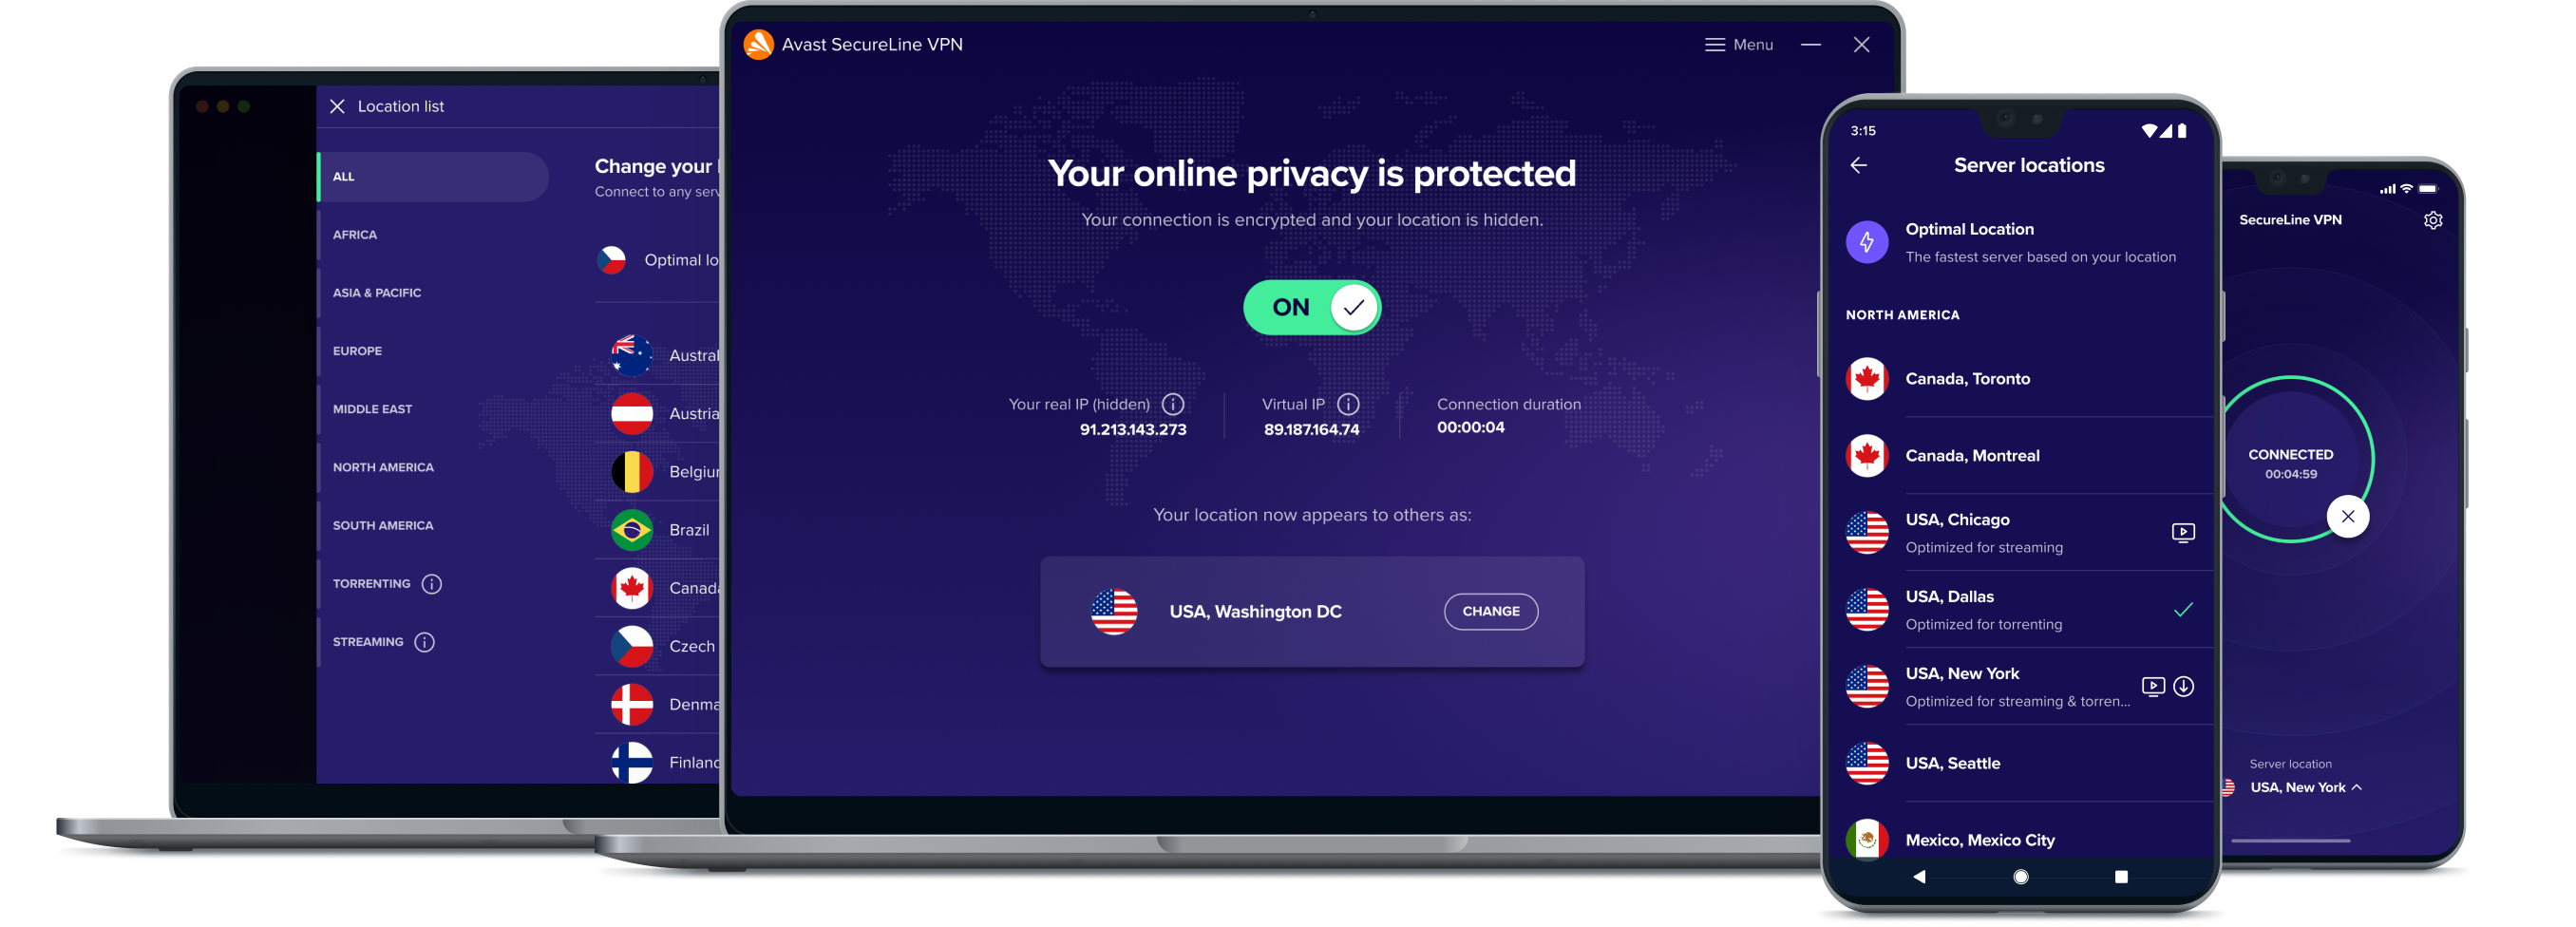 Unlock greater online freedom with our VPN service